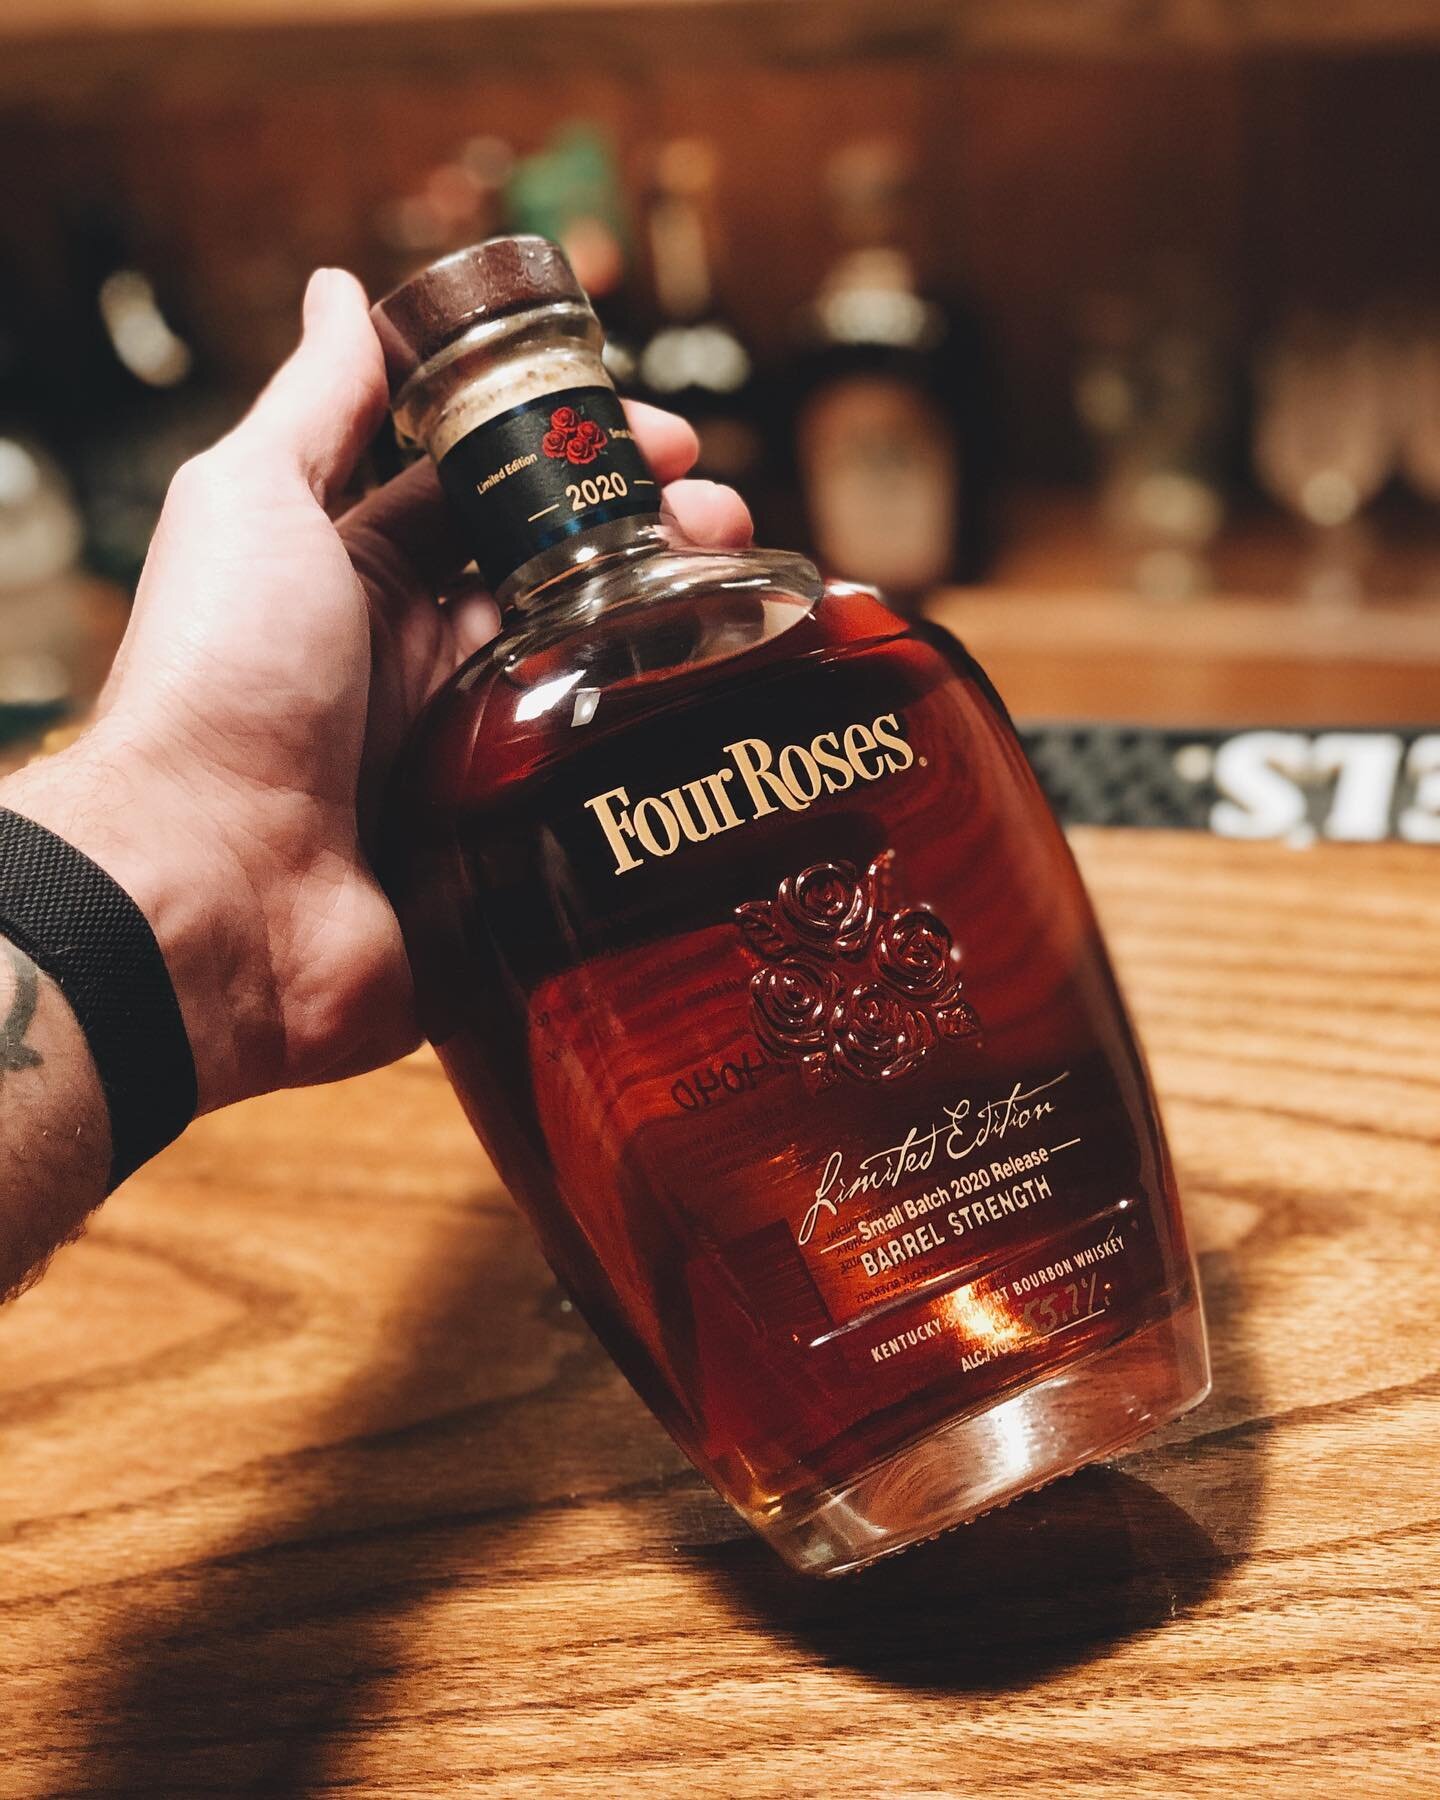 Neat Nation, we&rsquo;re finishing up the editing on episode #2 on the #EntryProofPodcast. That one has a little something to do with @fourrosesbourbon. Tune into the @drewpwhiskey YouTube Live Stream tomorrow at 8 PM CST for news on the new episode 